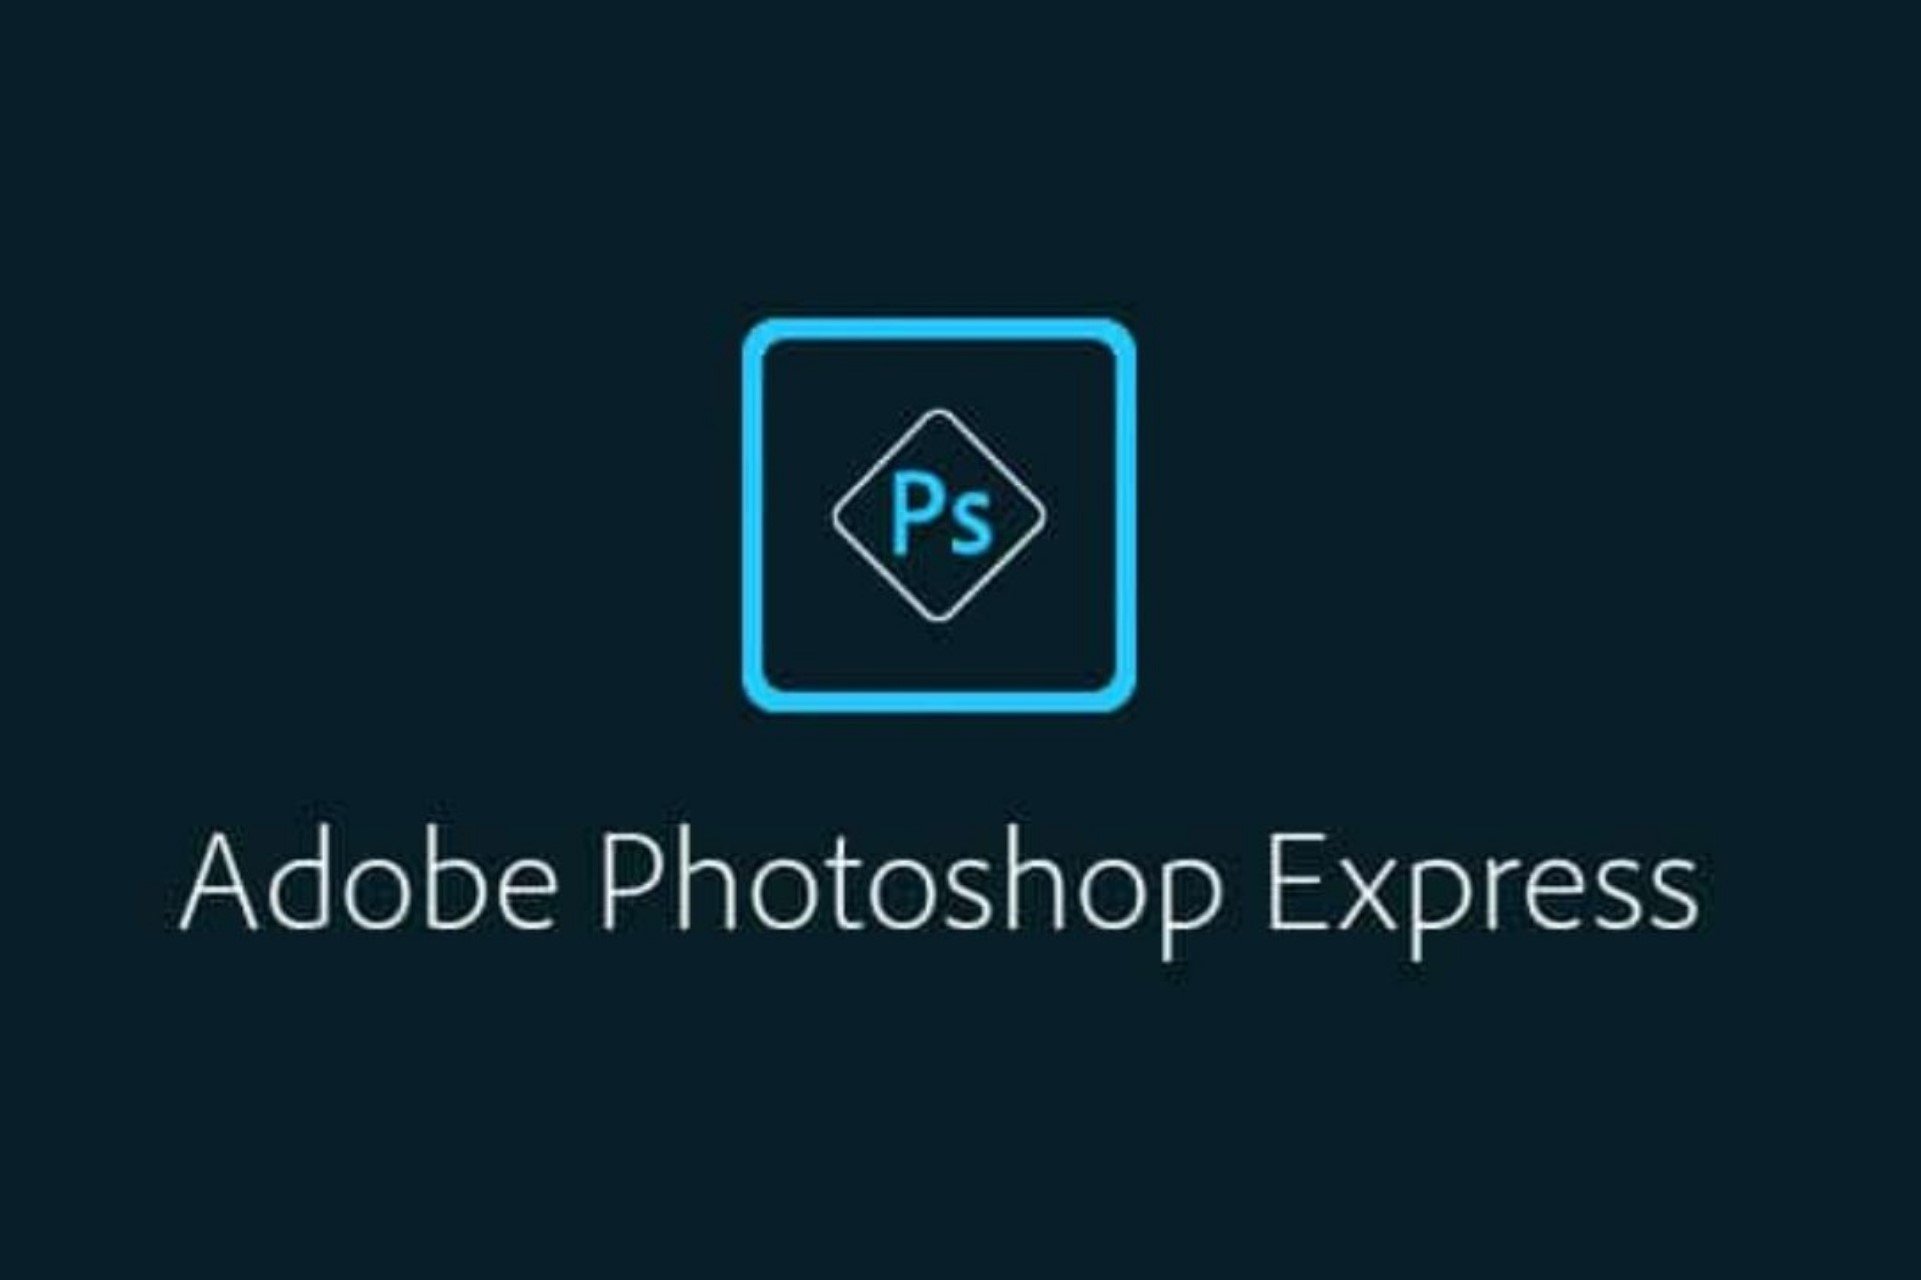 adobe photoshop express for windows 10 free download